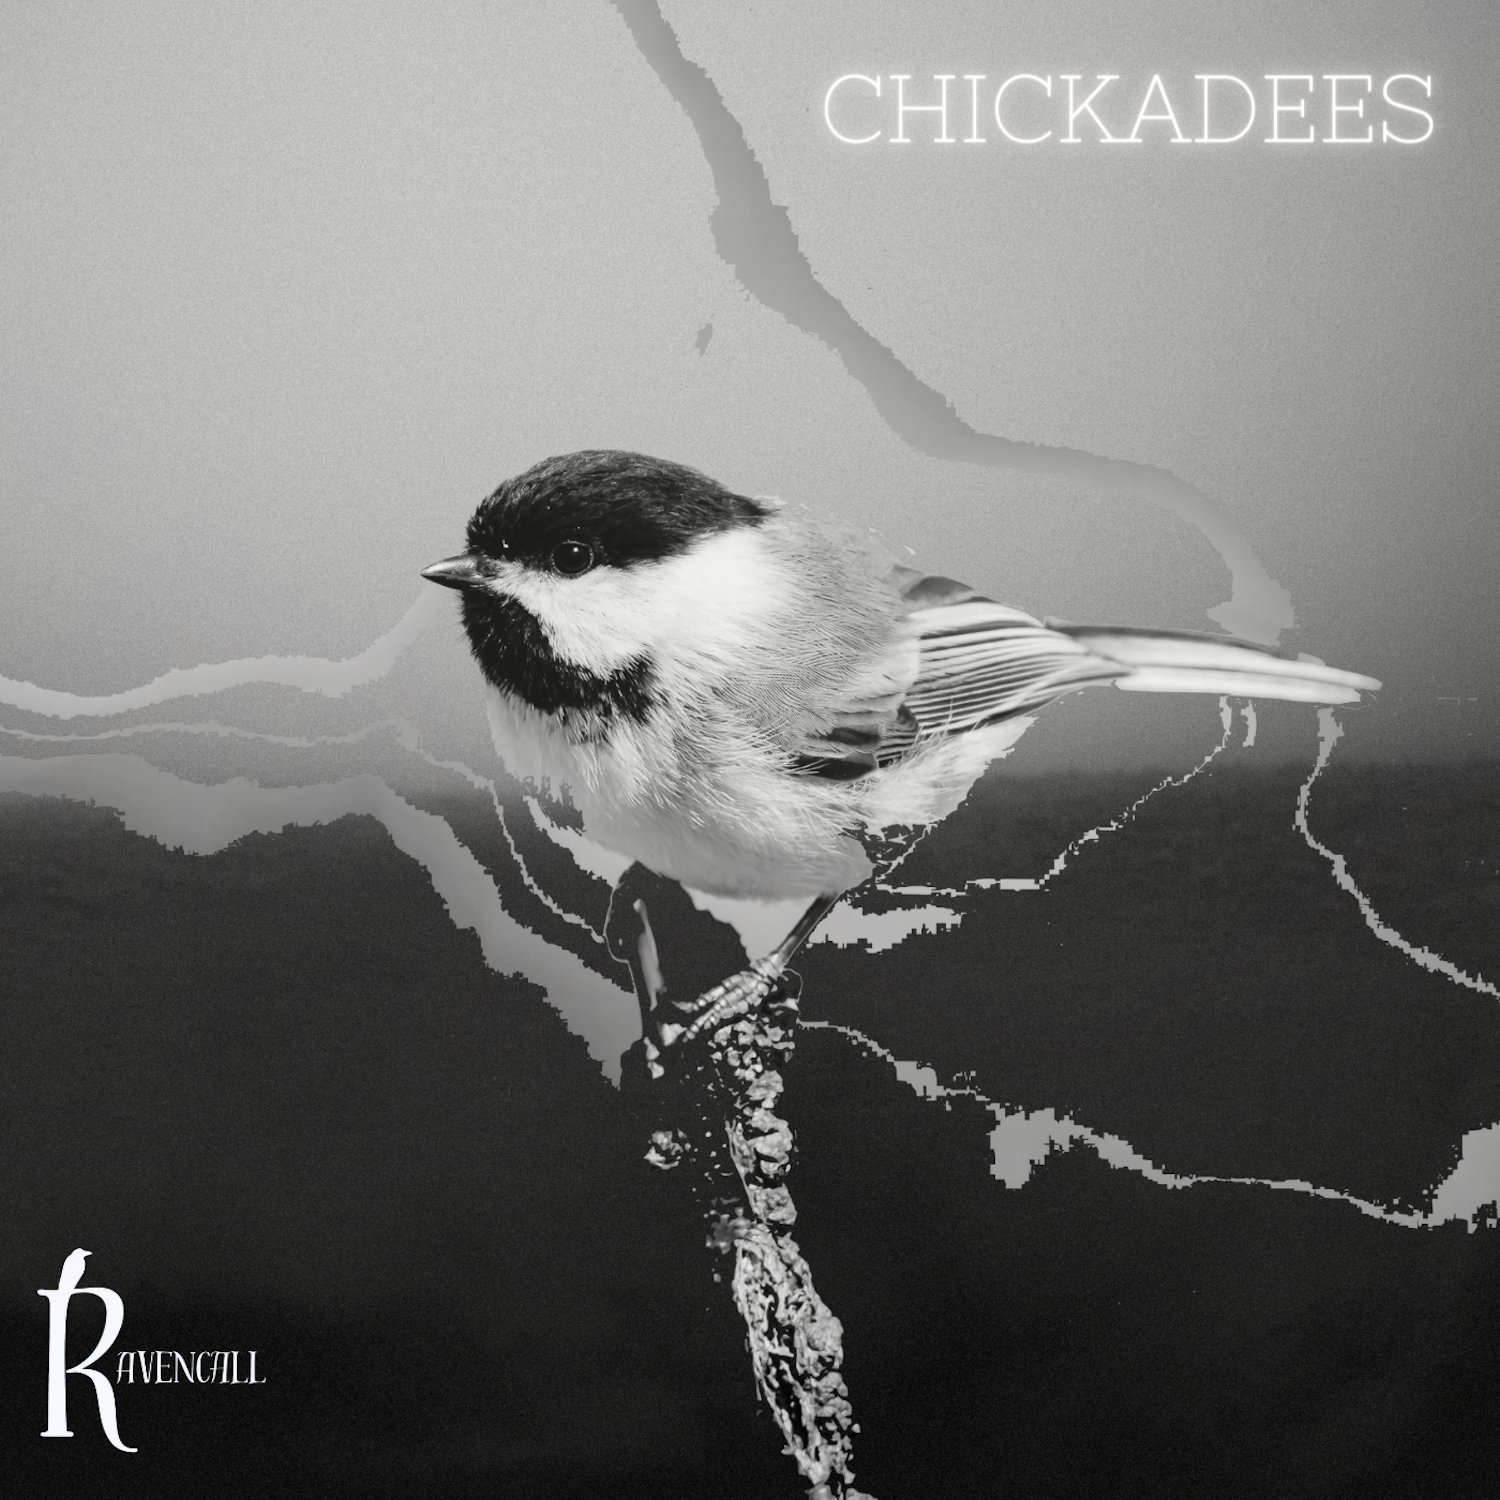 Black and white album art of a chickadee on abstract background